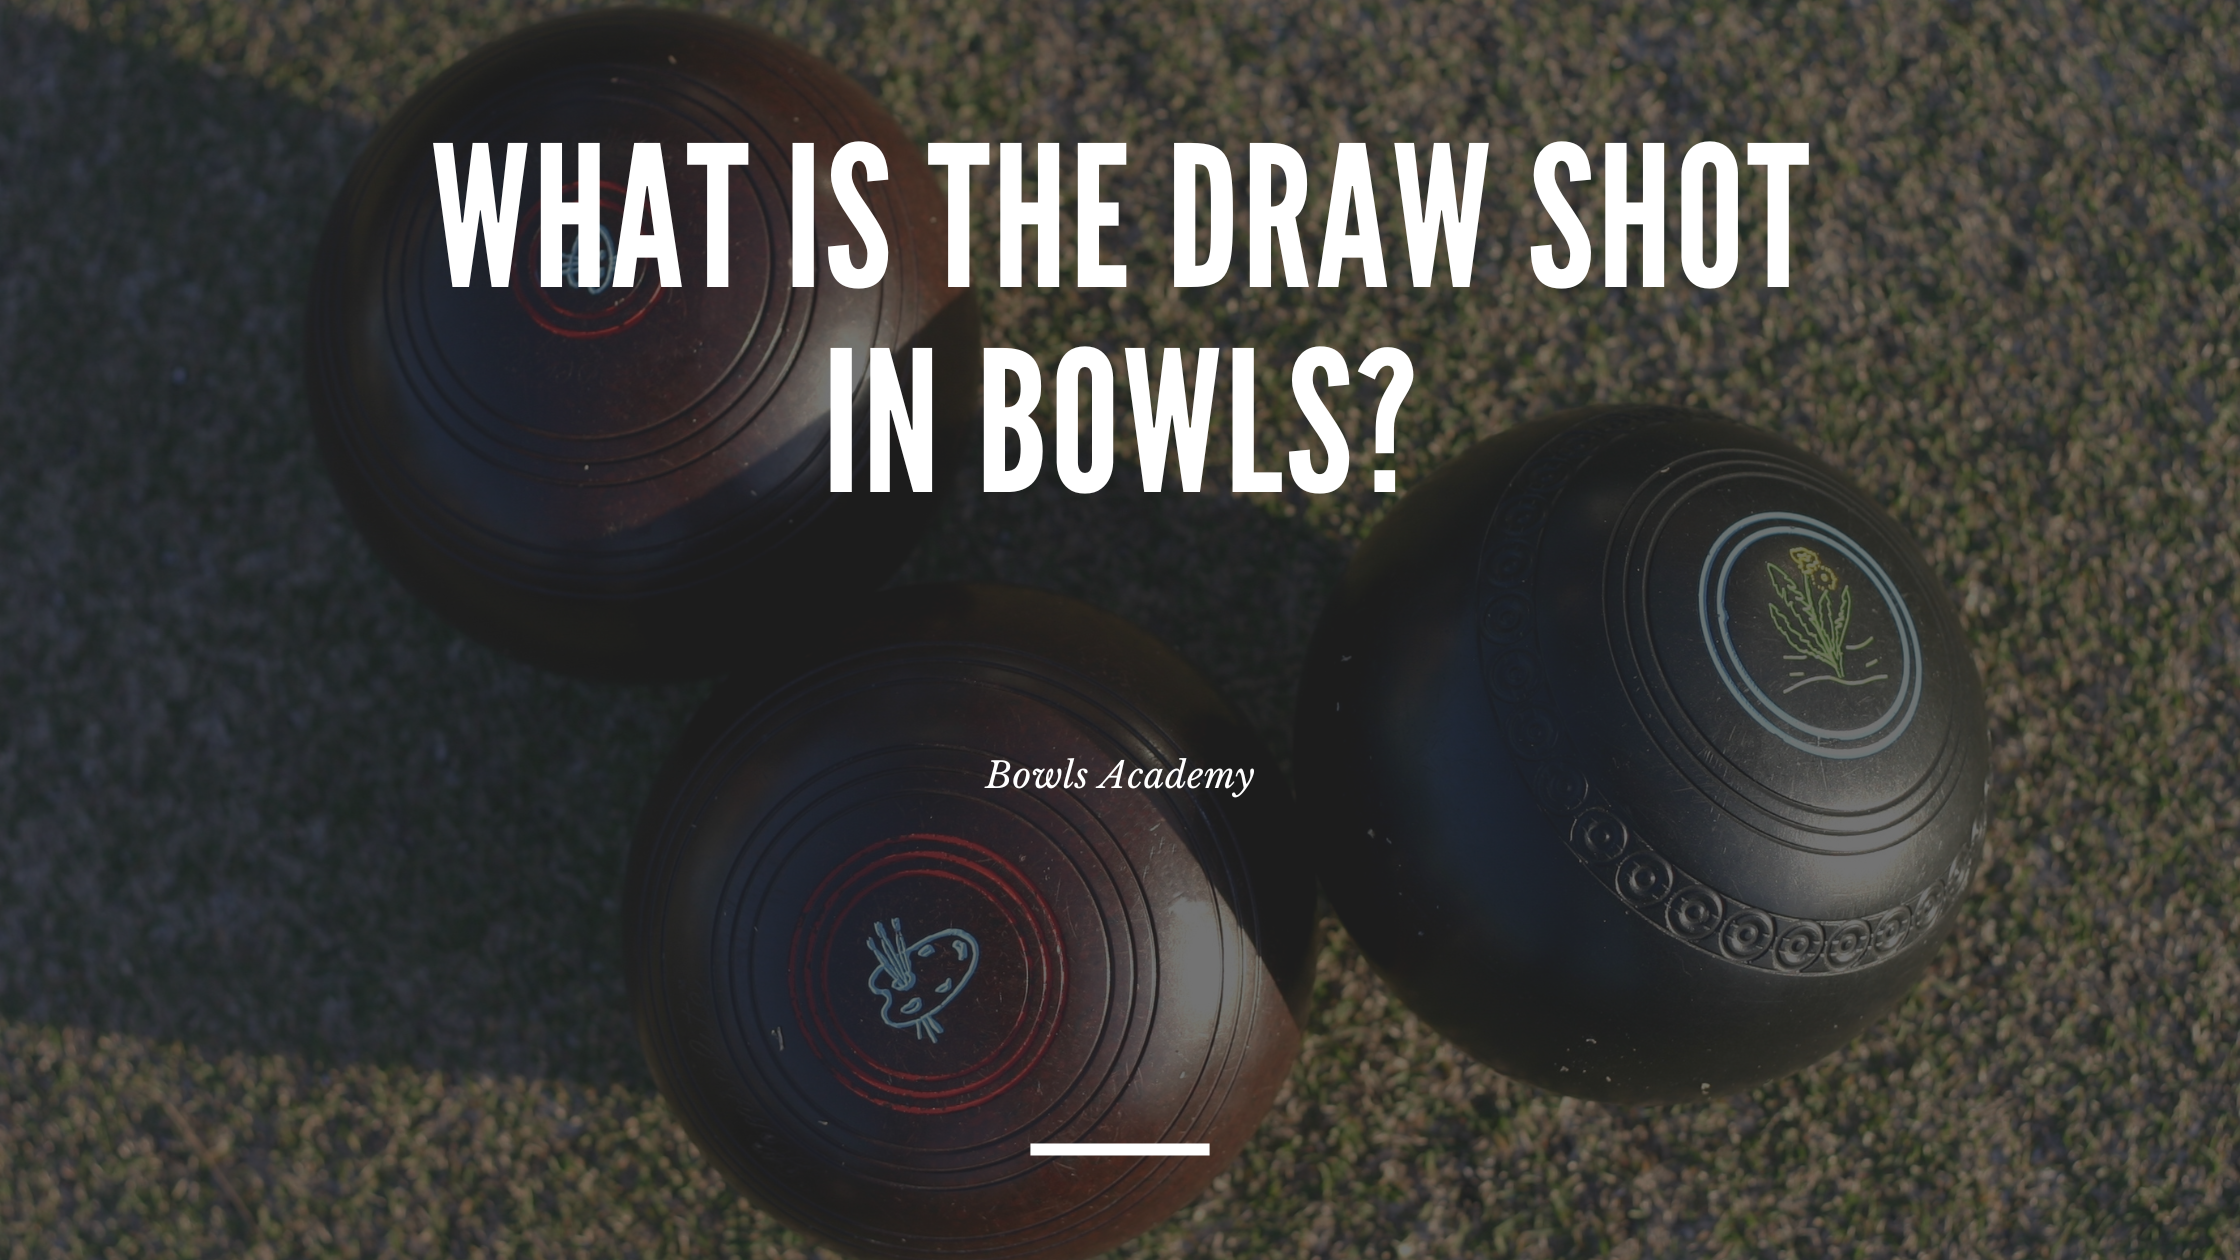 image of lawn bowls